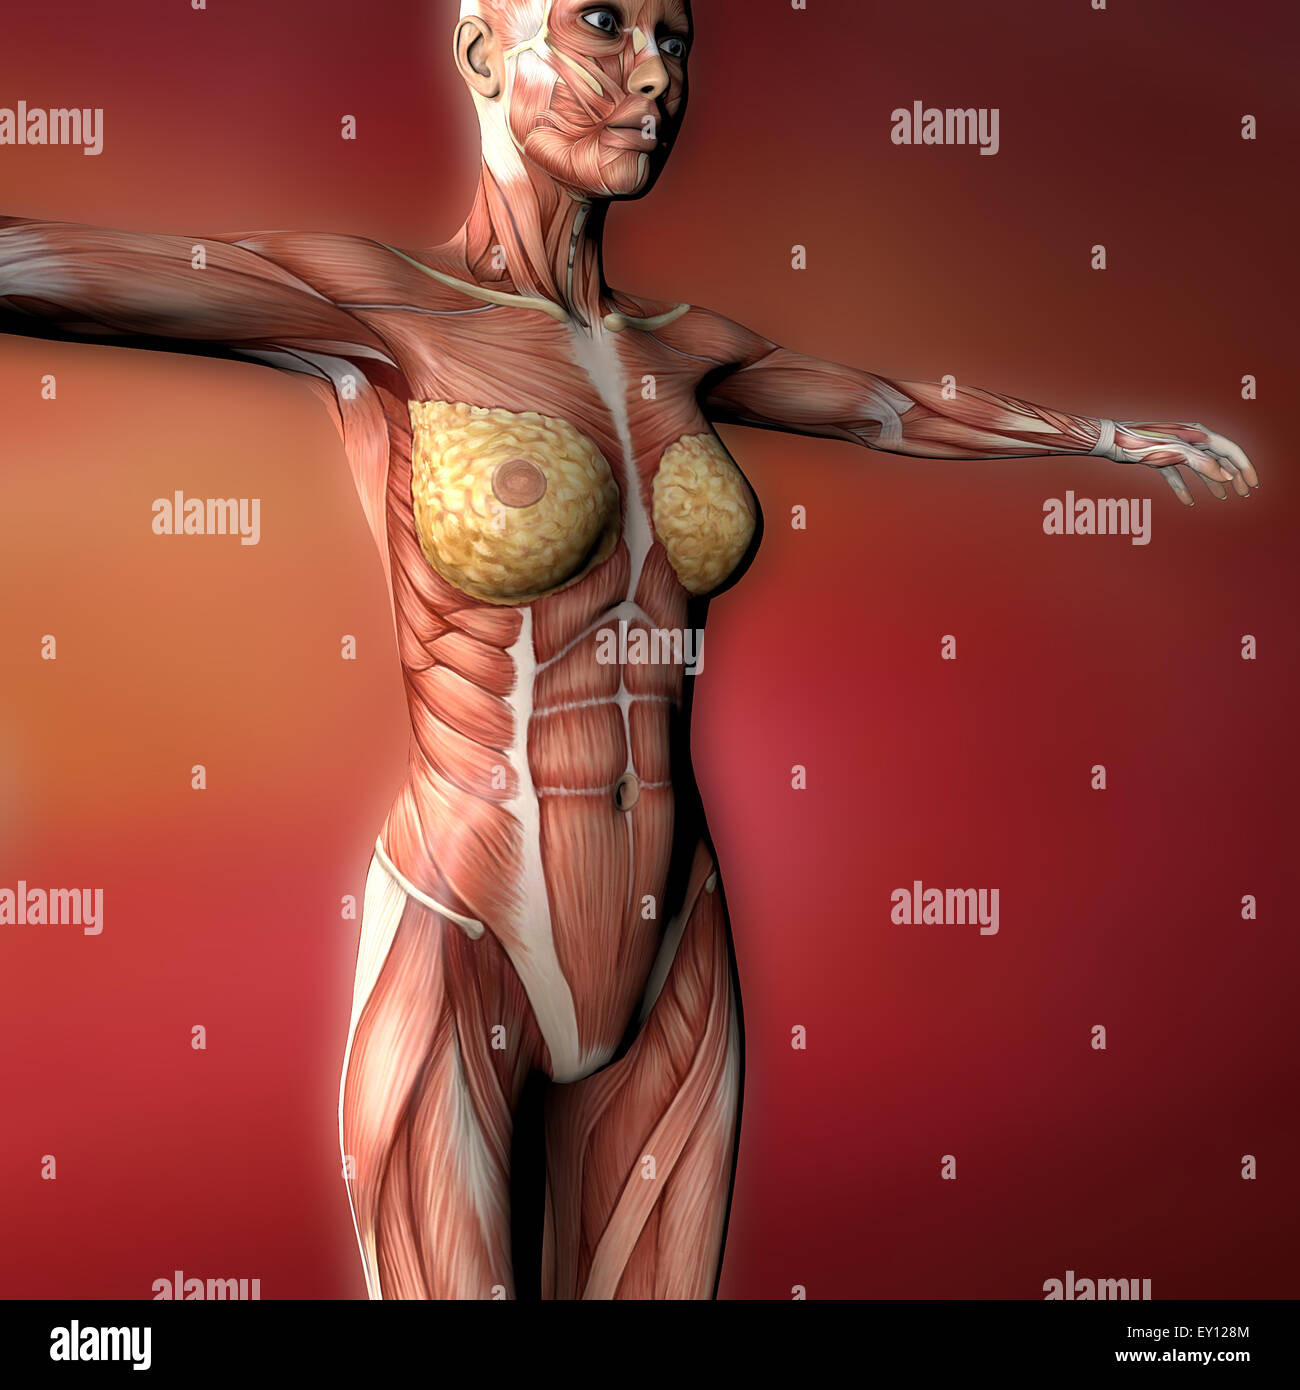 https://c8.alamy.com/comp/EY128M/female-body-muscles-illustration-on-red-background-EY128M.jpg